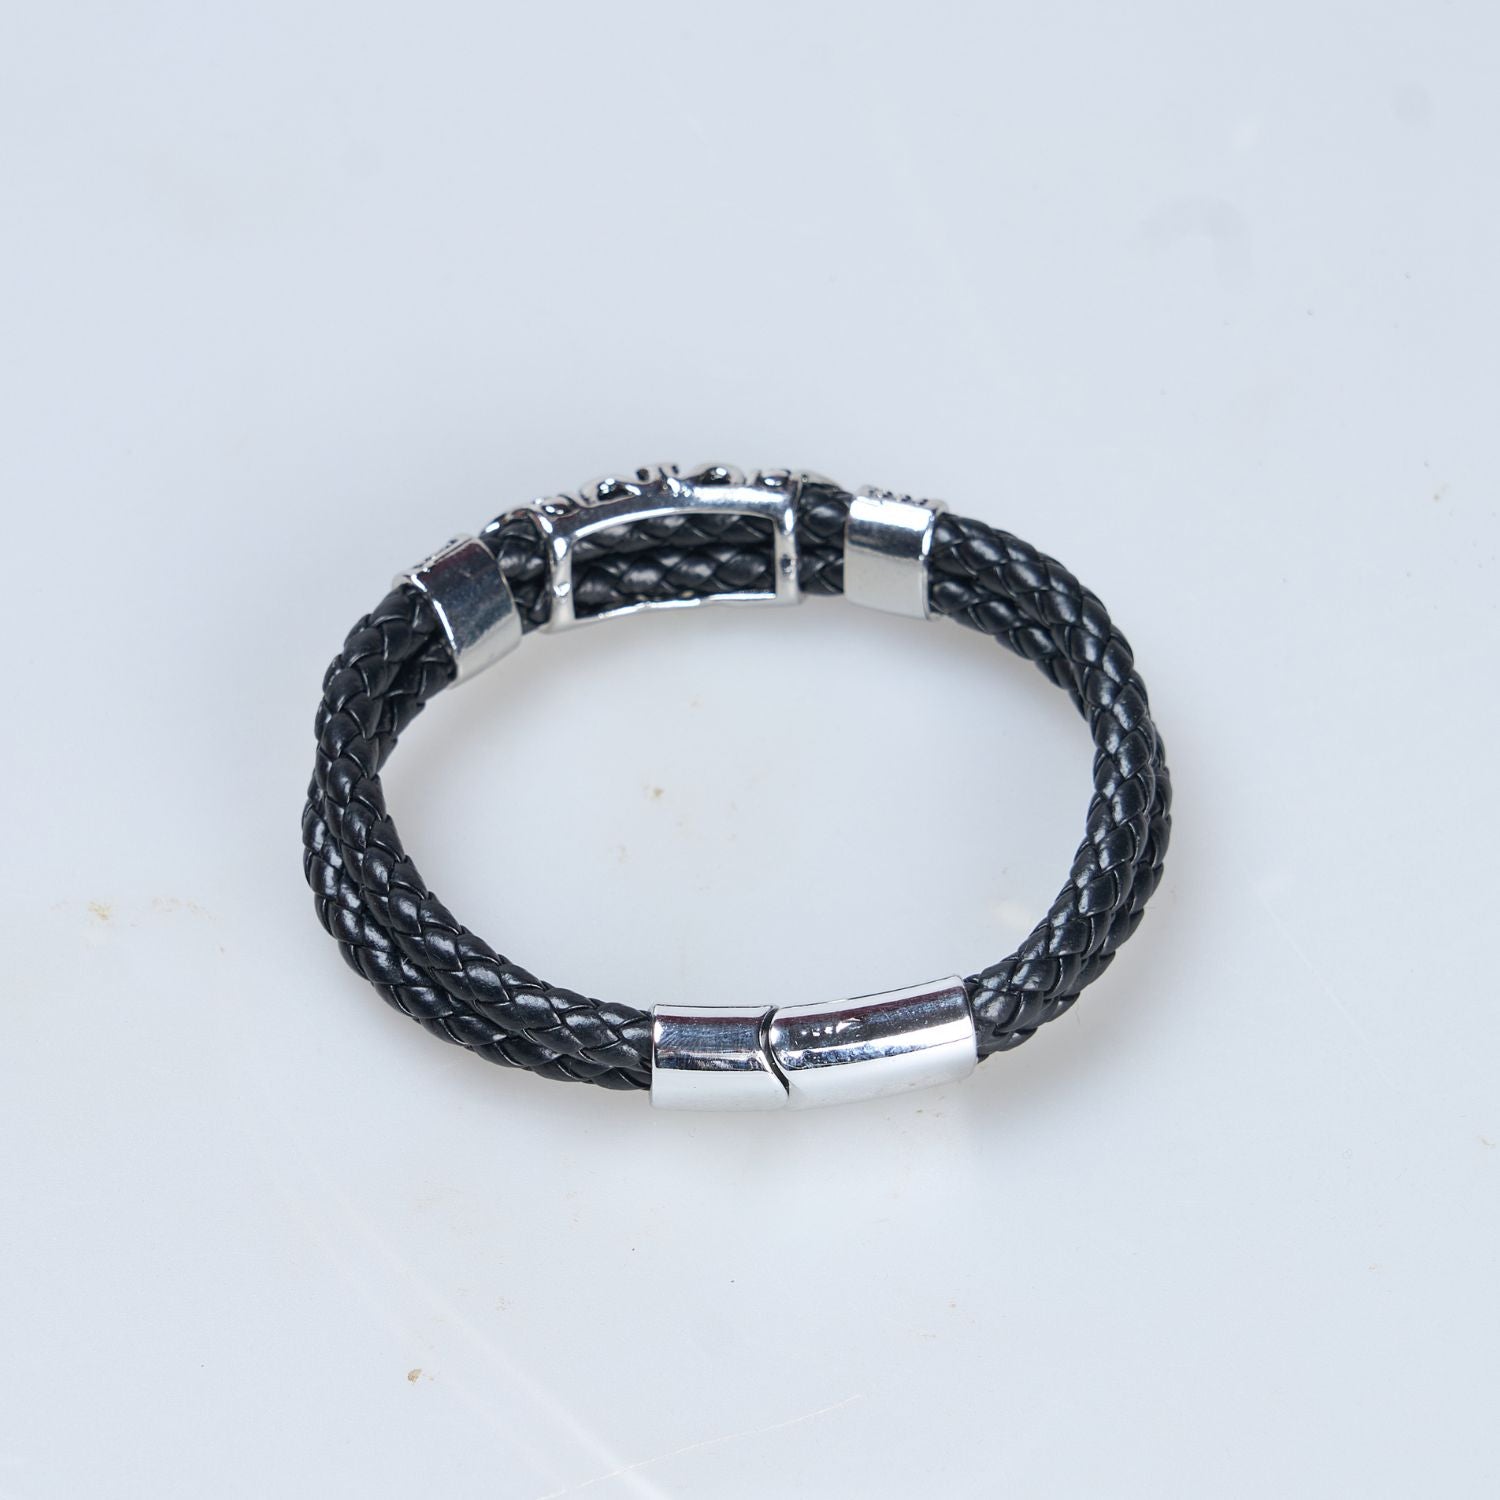 Back View of Black and Silver colored Bracelet for men with magnetic clasp